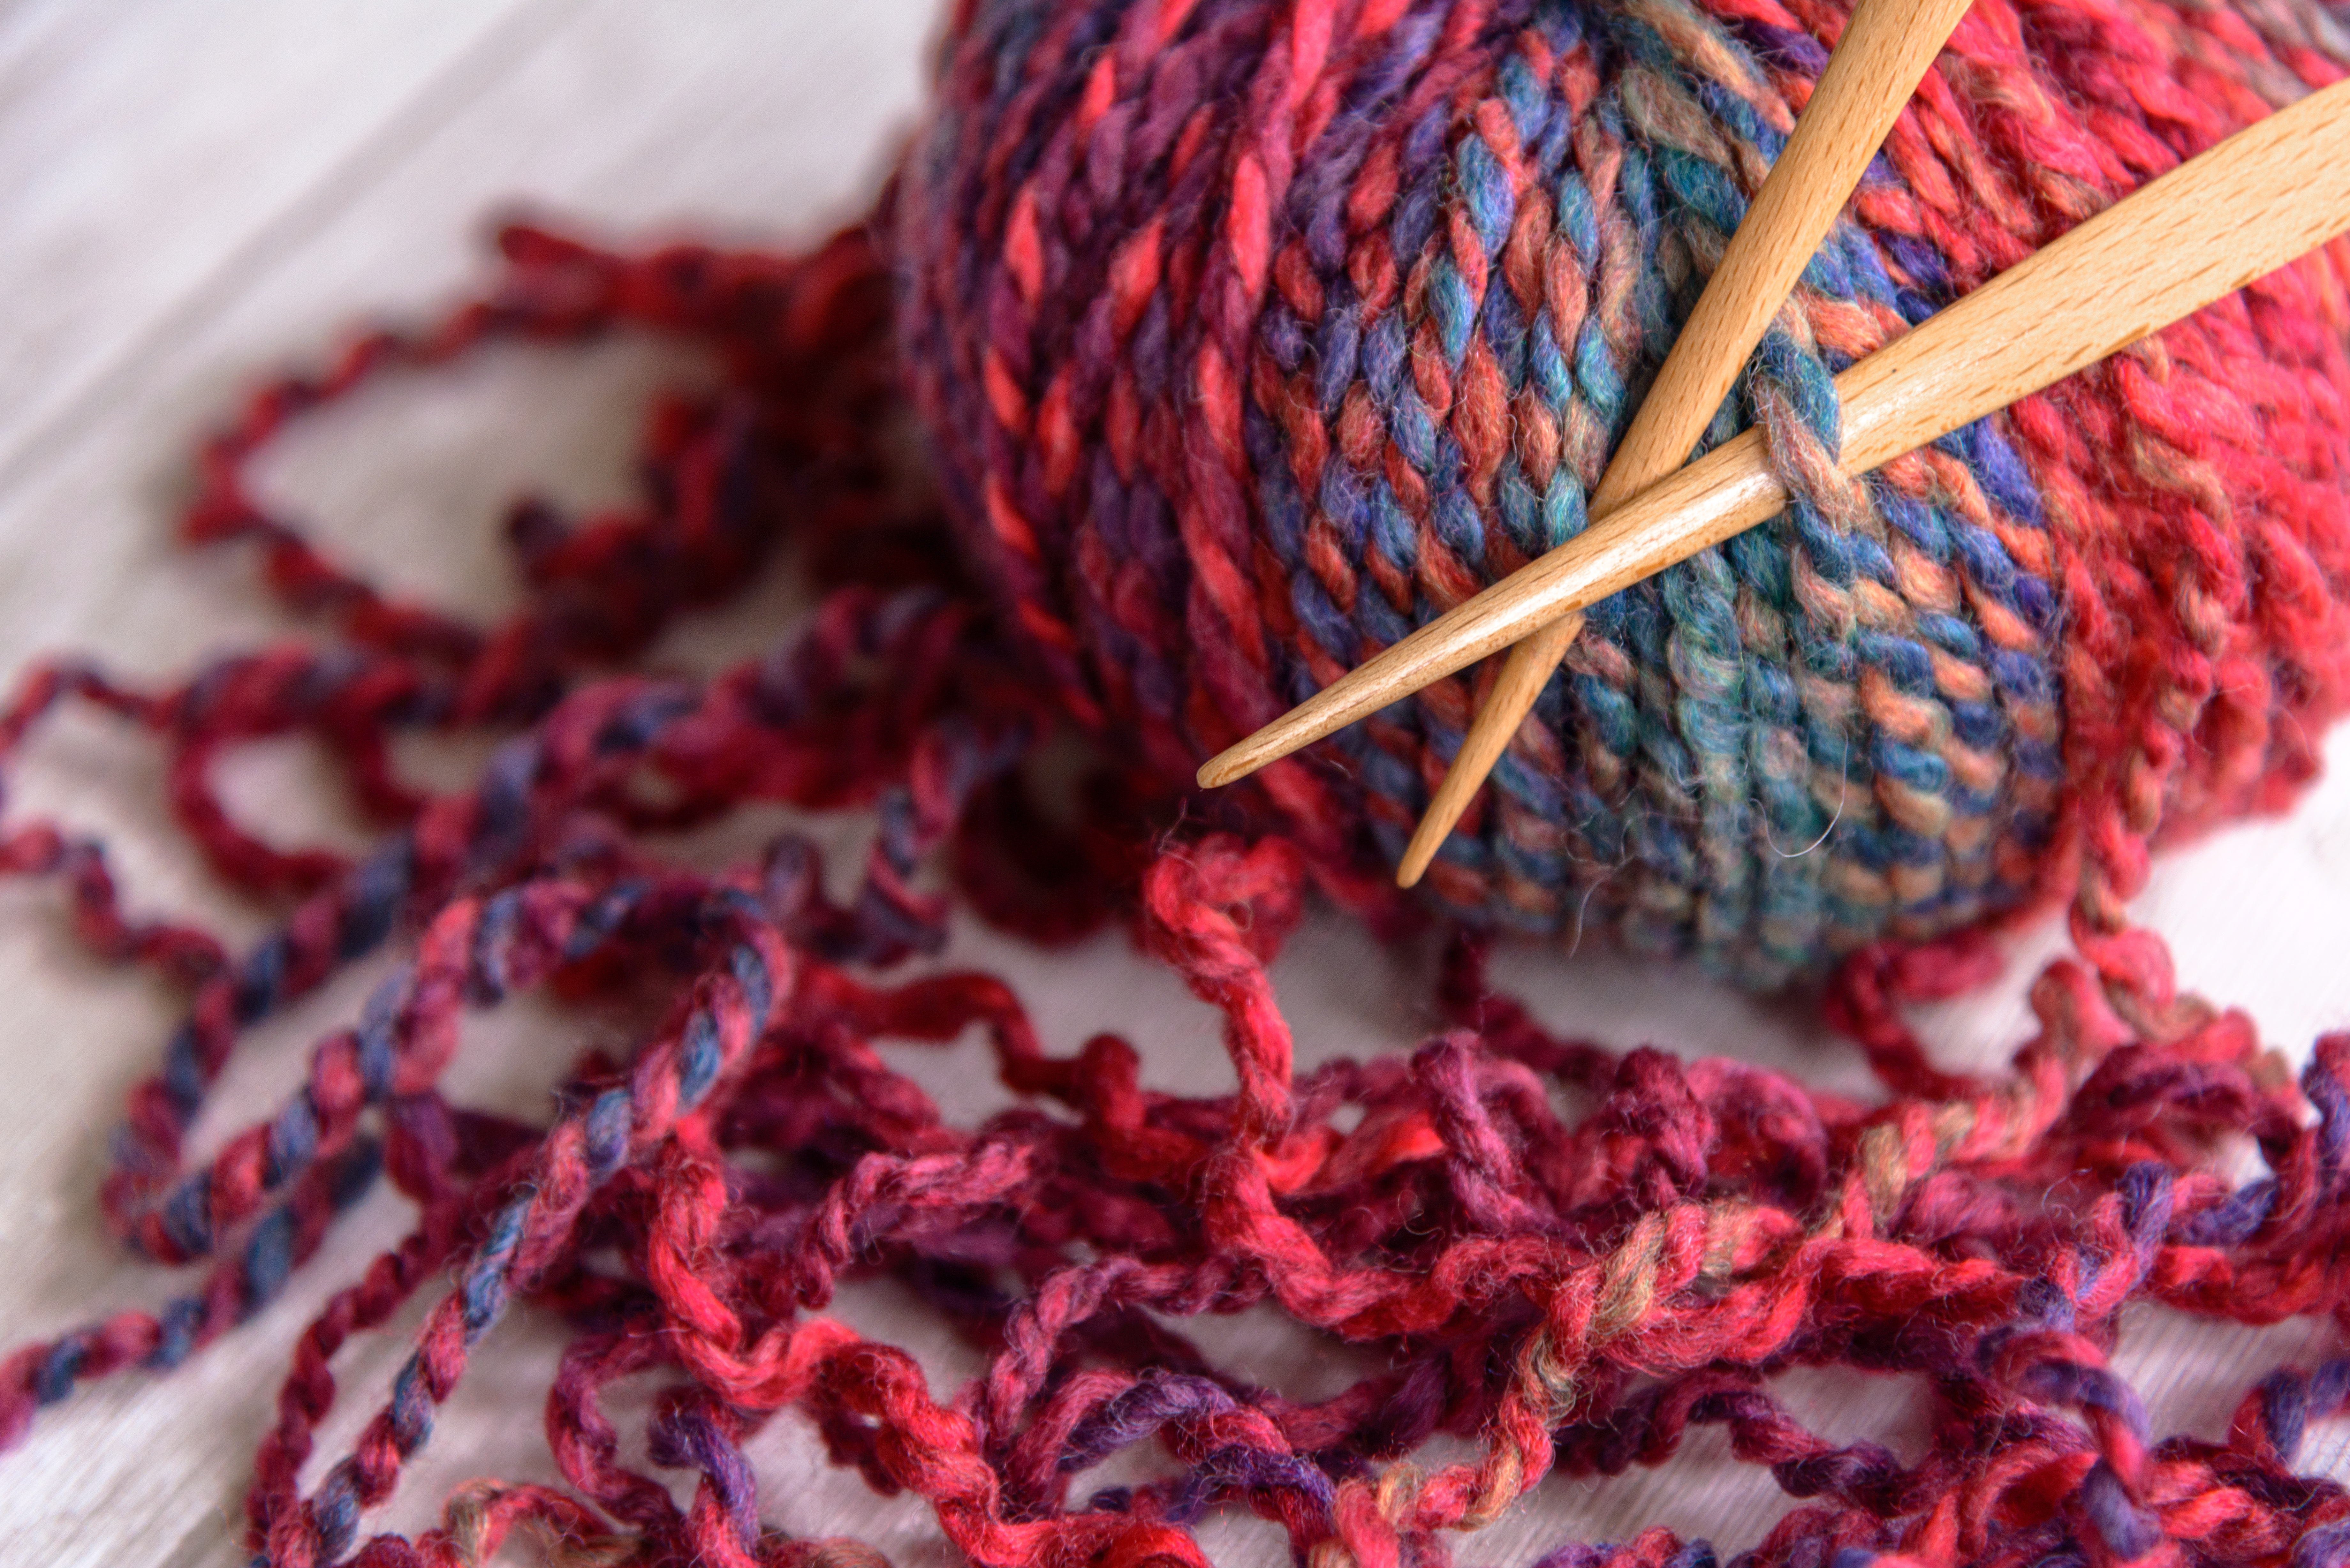 Rivalry Knitting Patterns This Knitting Group Just Banned Posts Supporting Trump Time